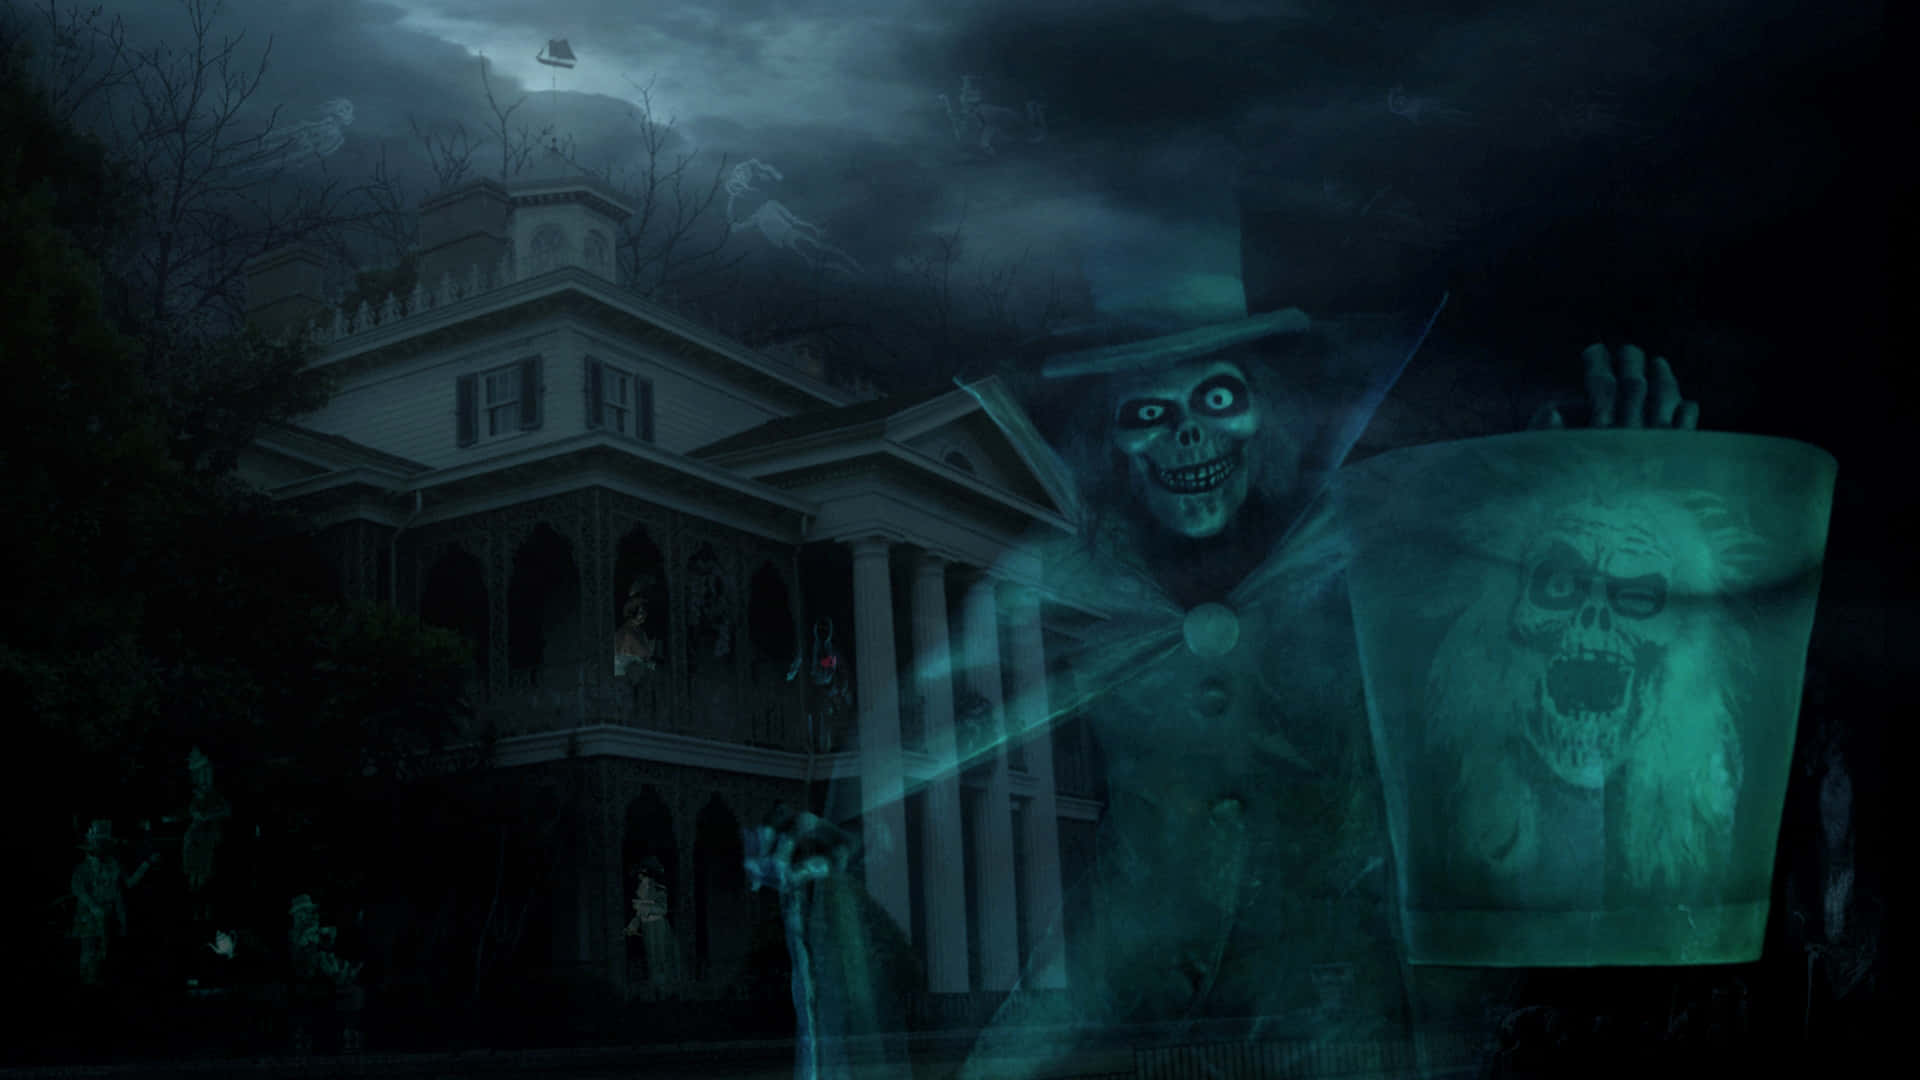 Scary ghosts and the Haunted Mansion will have you shivering in fear